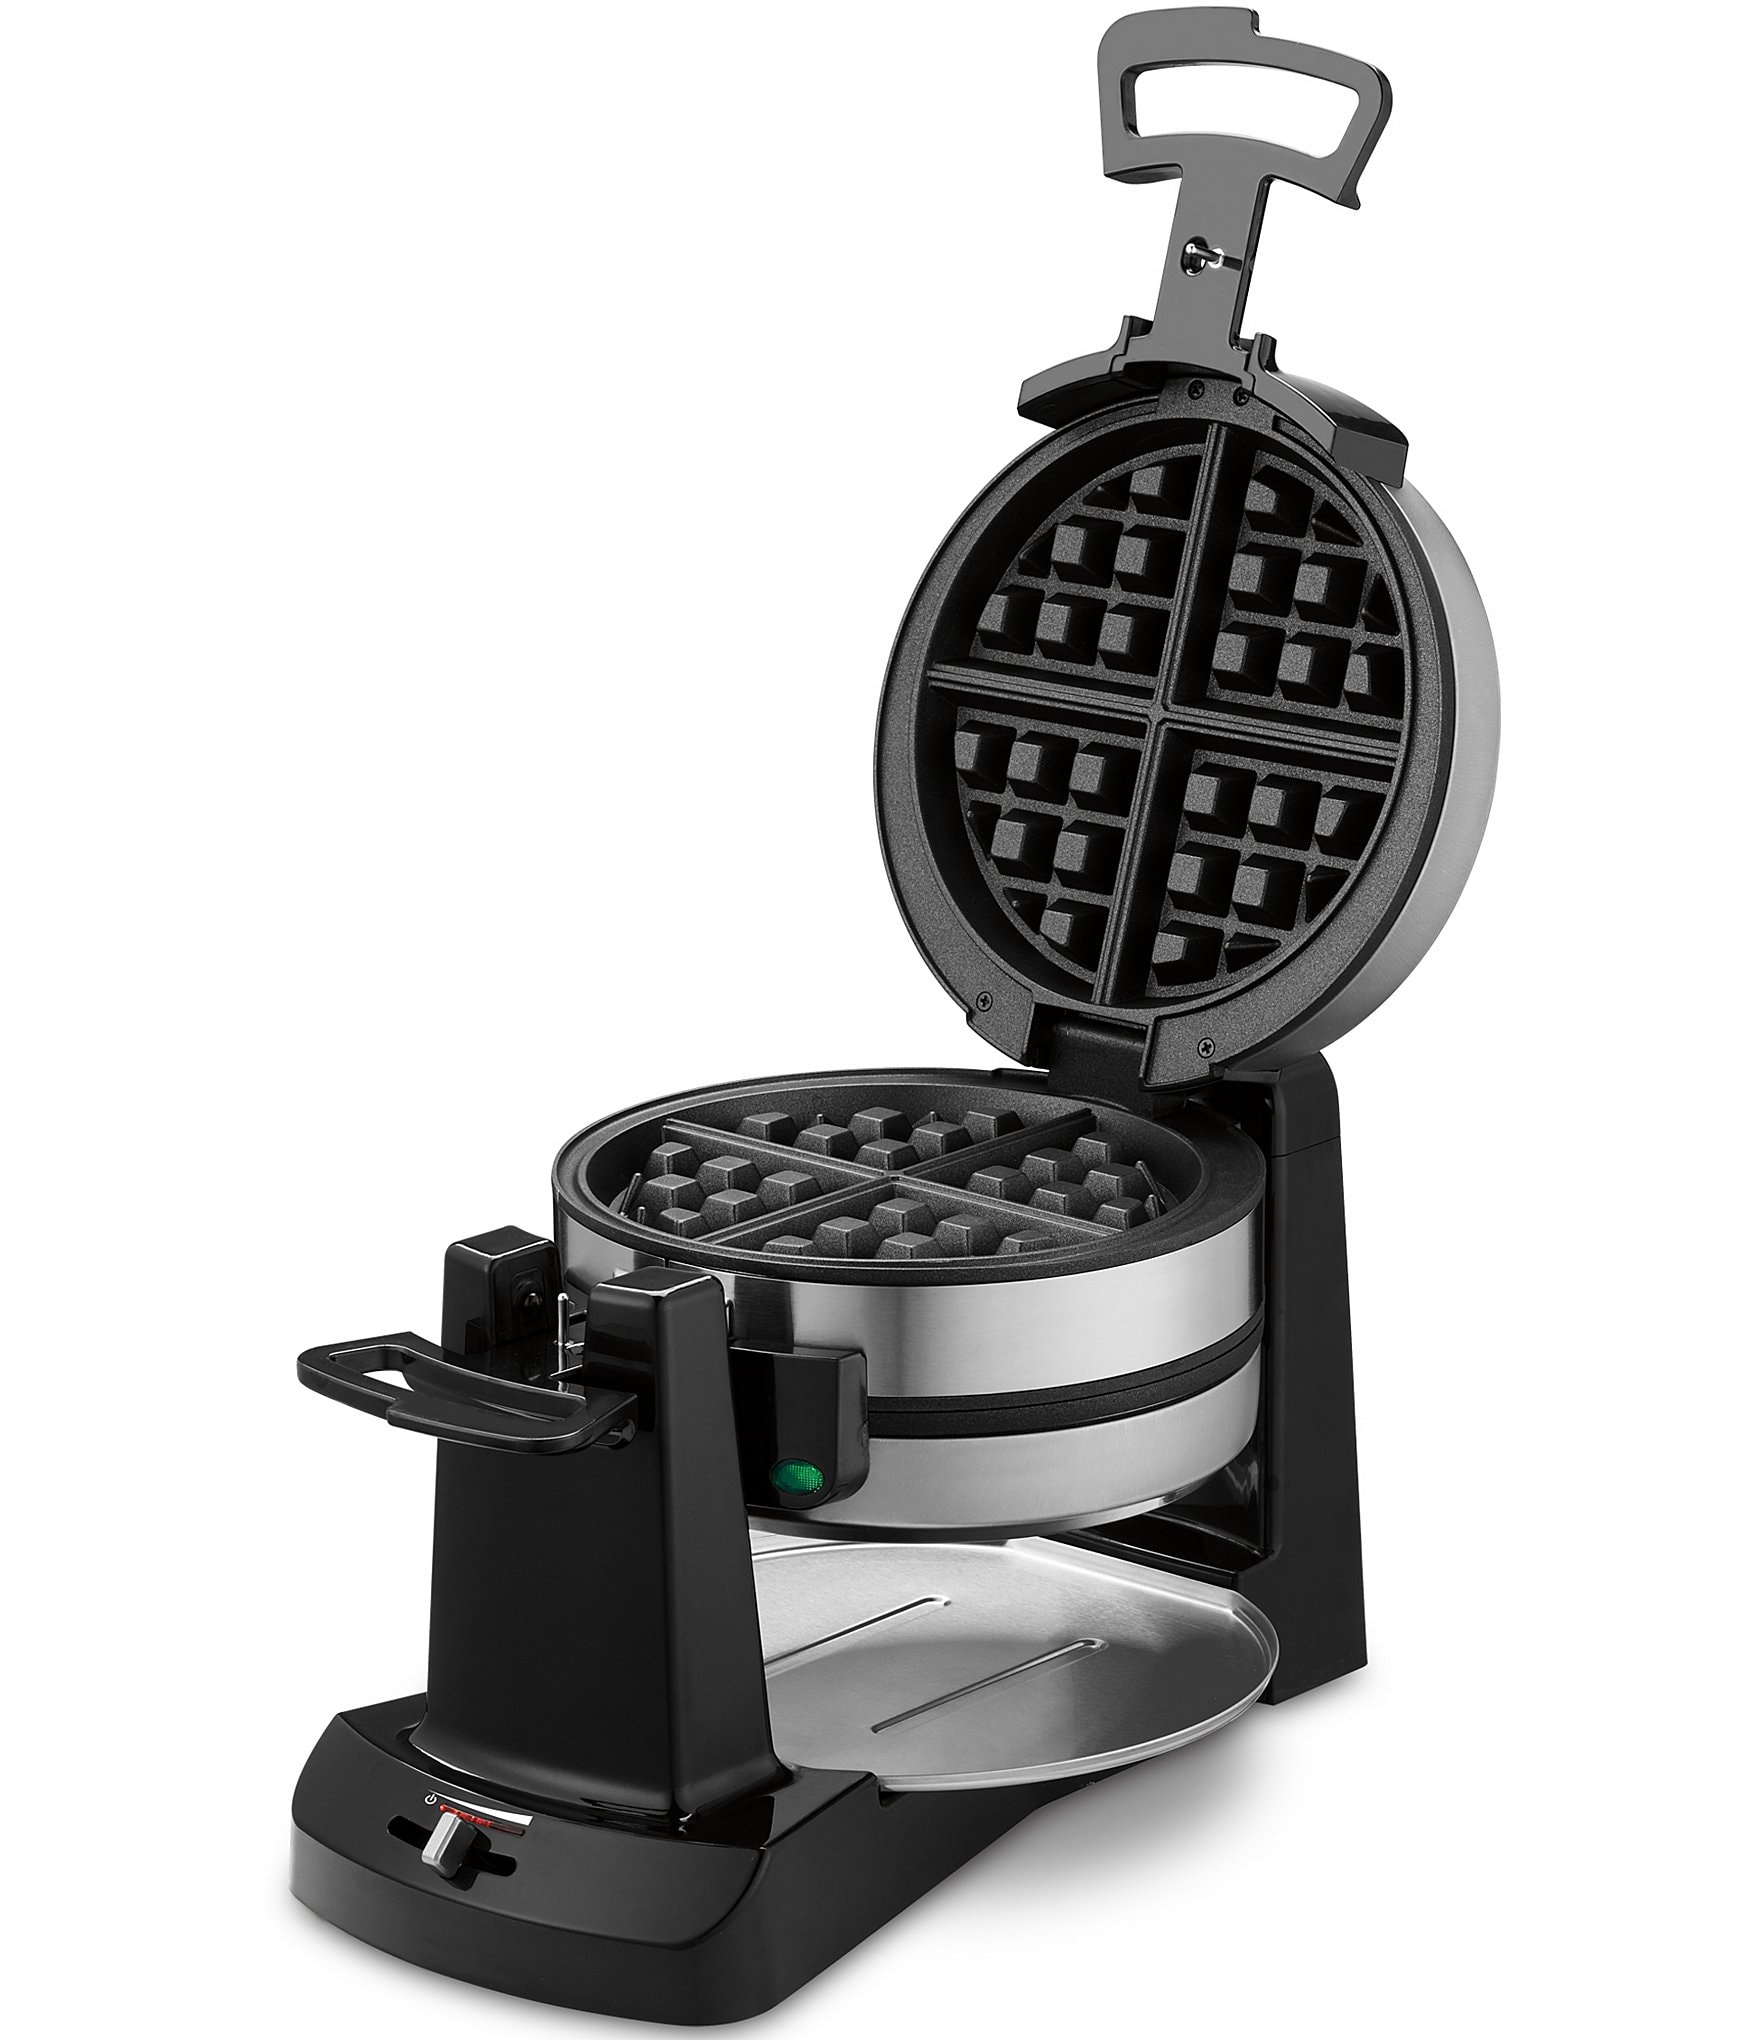 The Secret Way To Clean A Waffle Iron